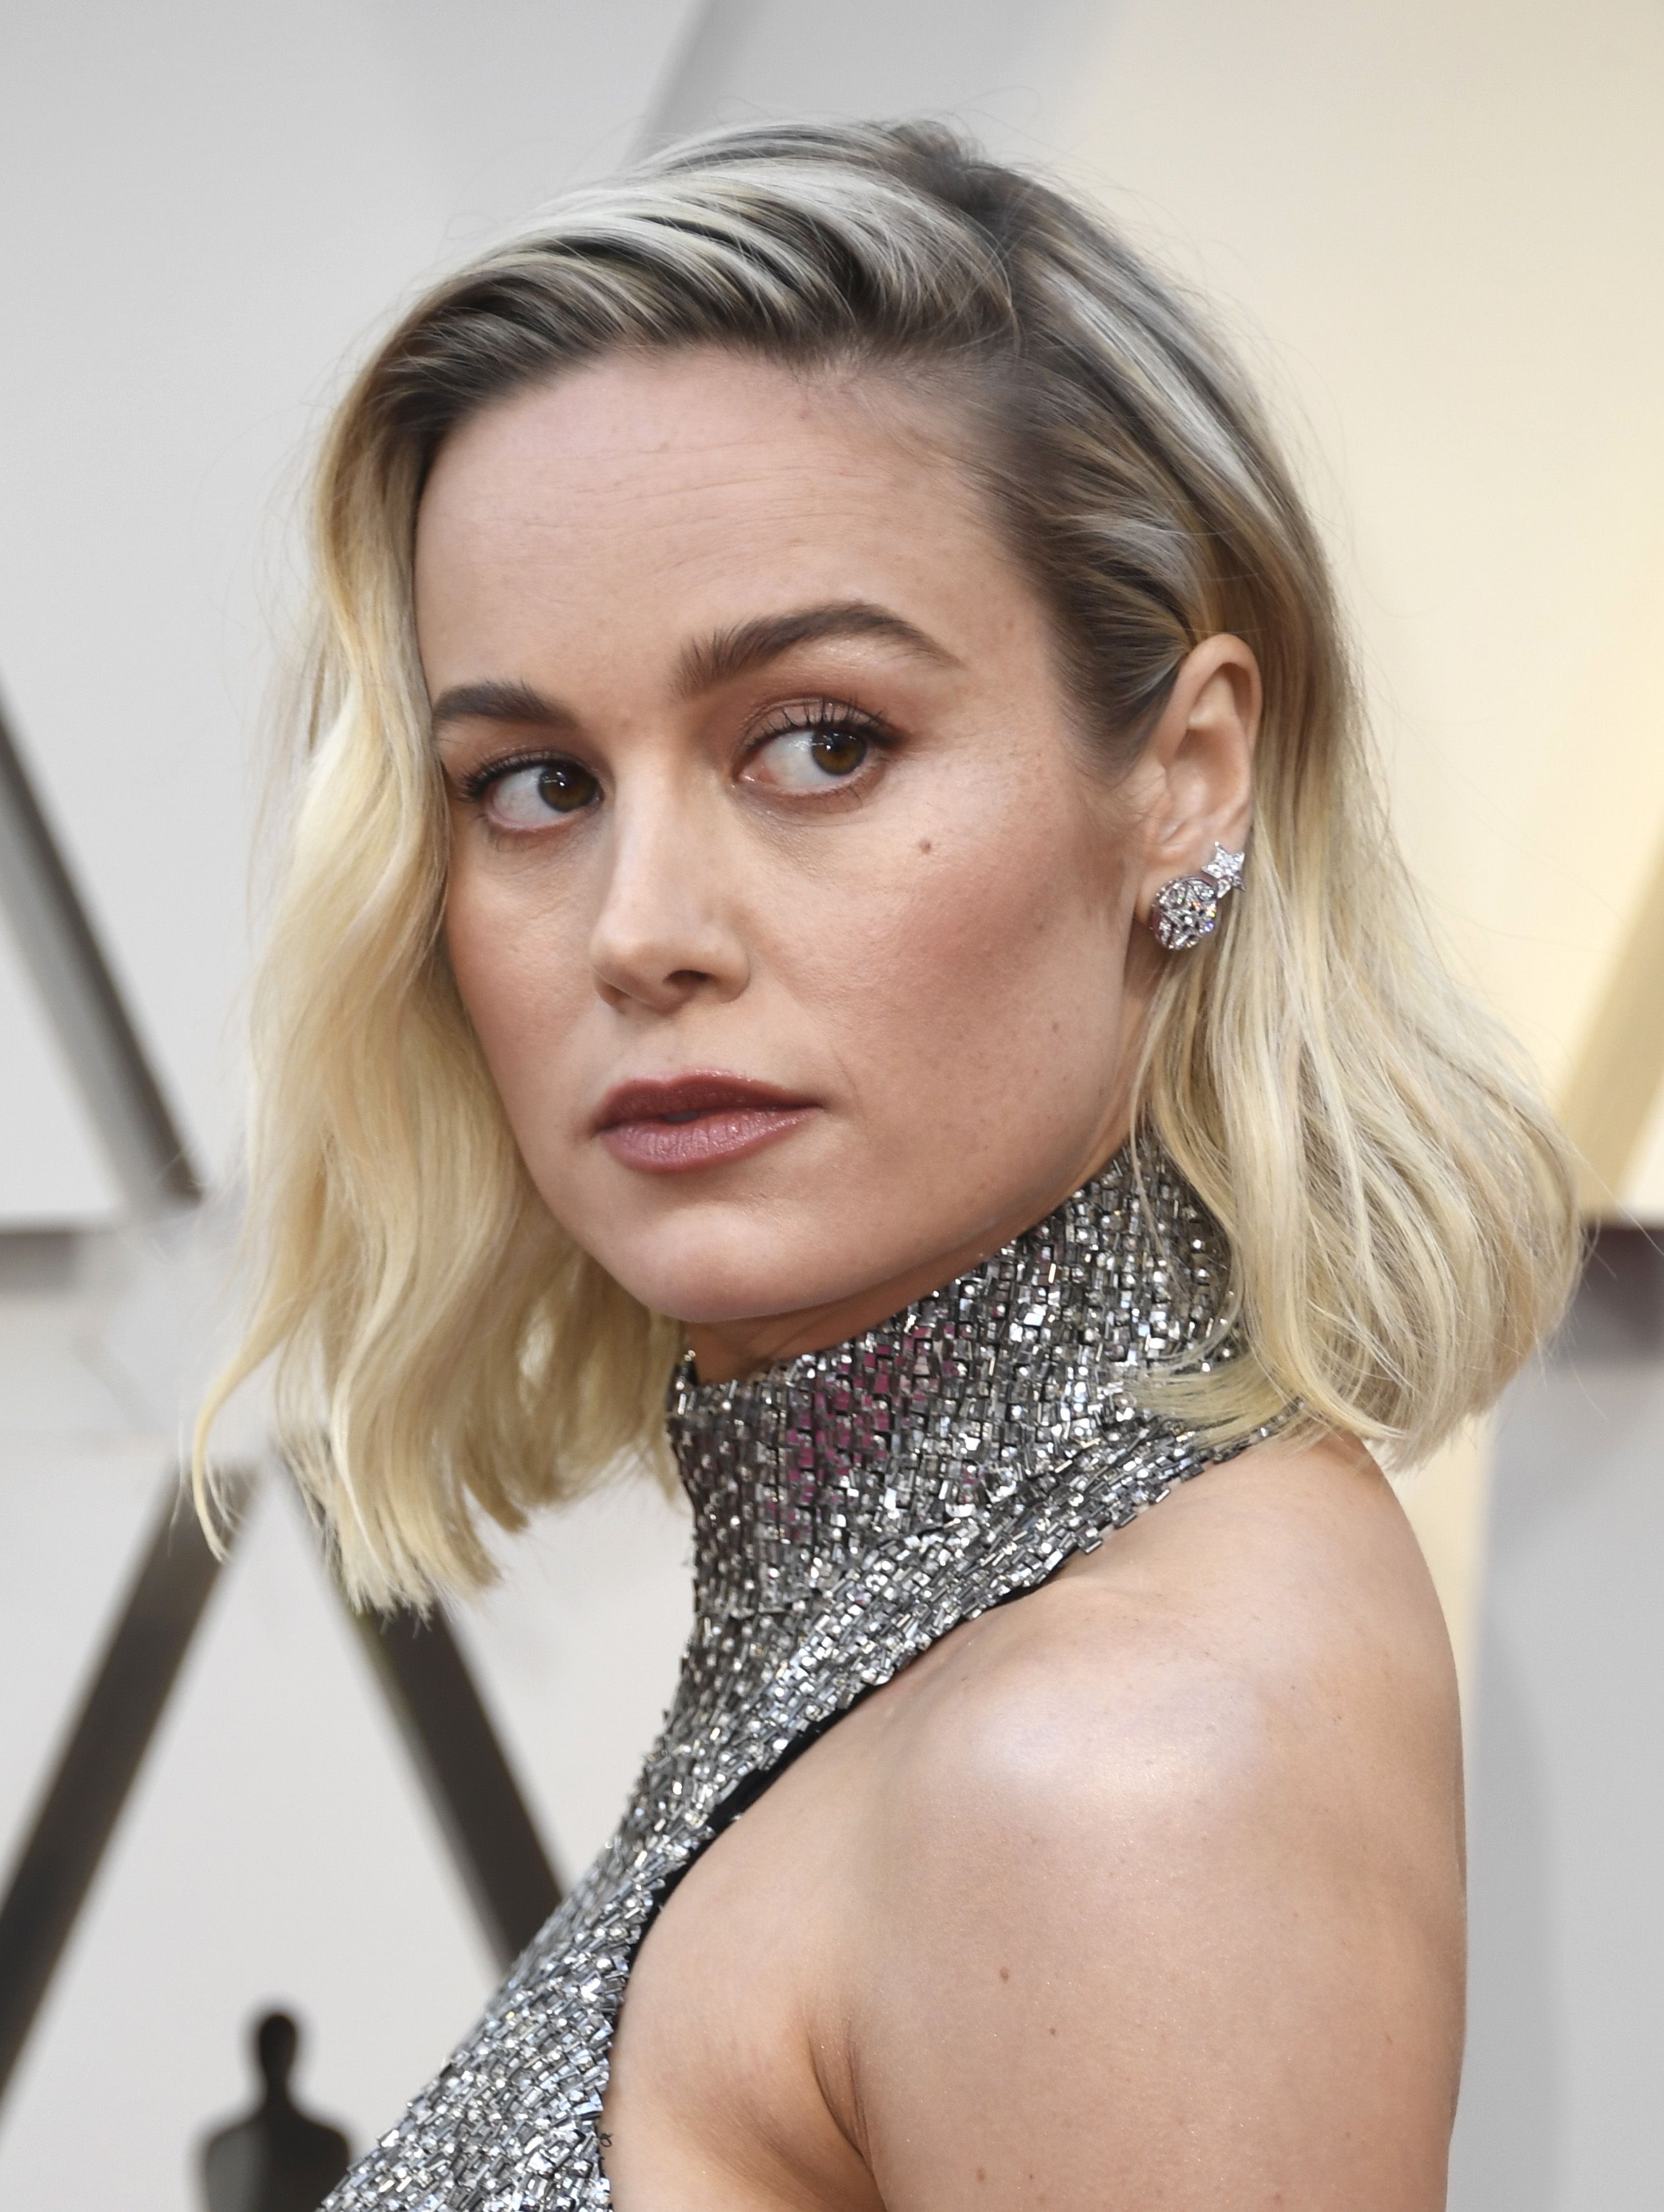 Best Oscars Hairstyles of All Time - Award Show Hair